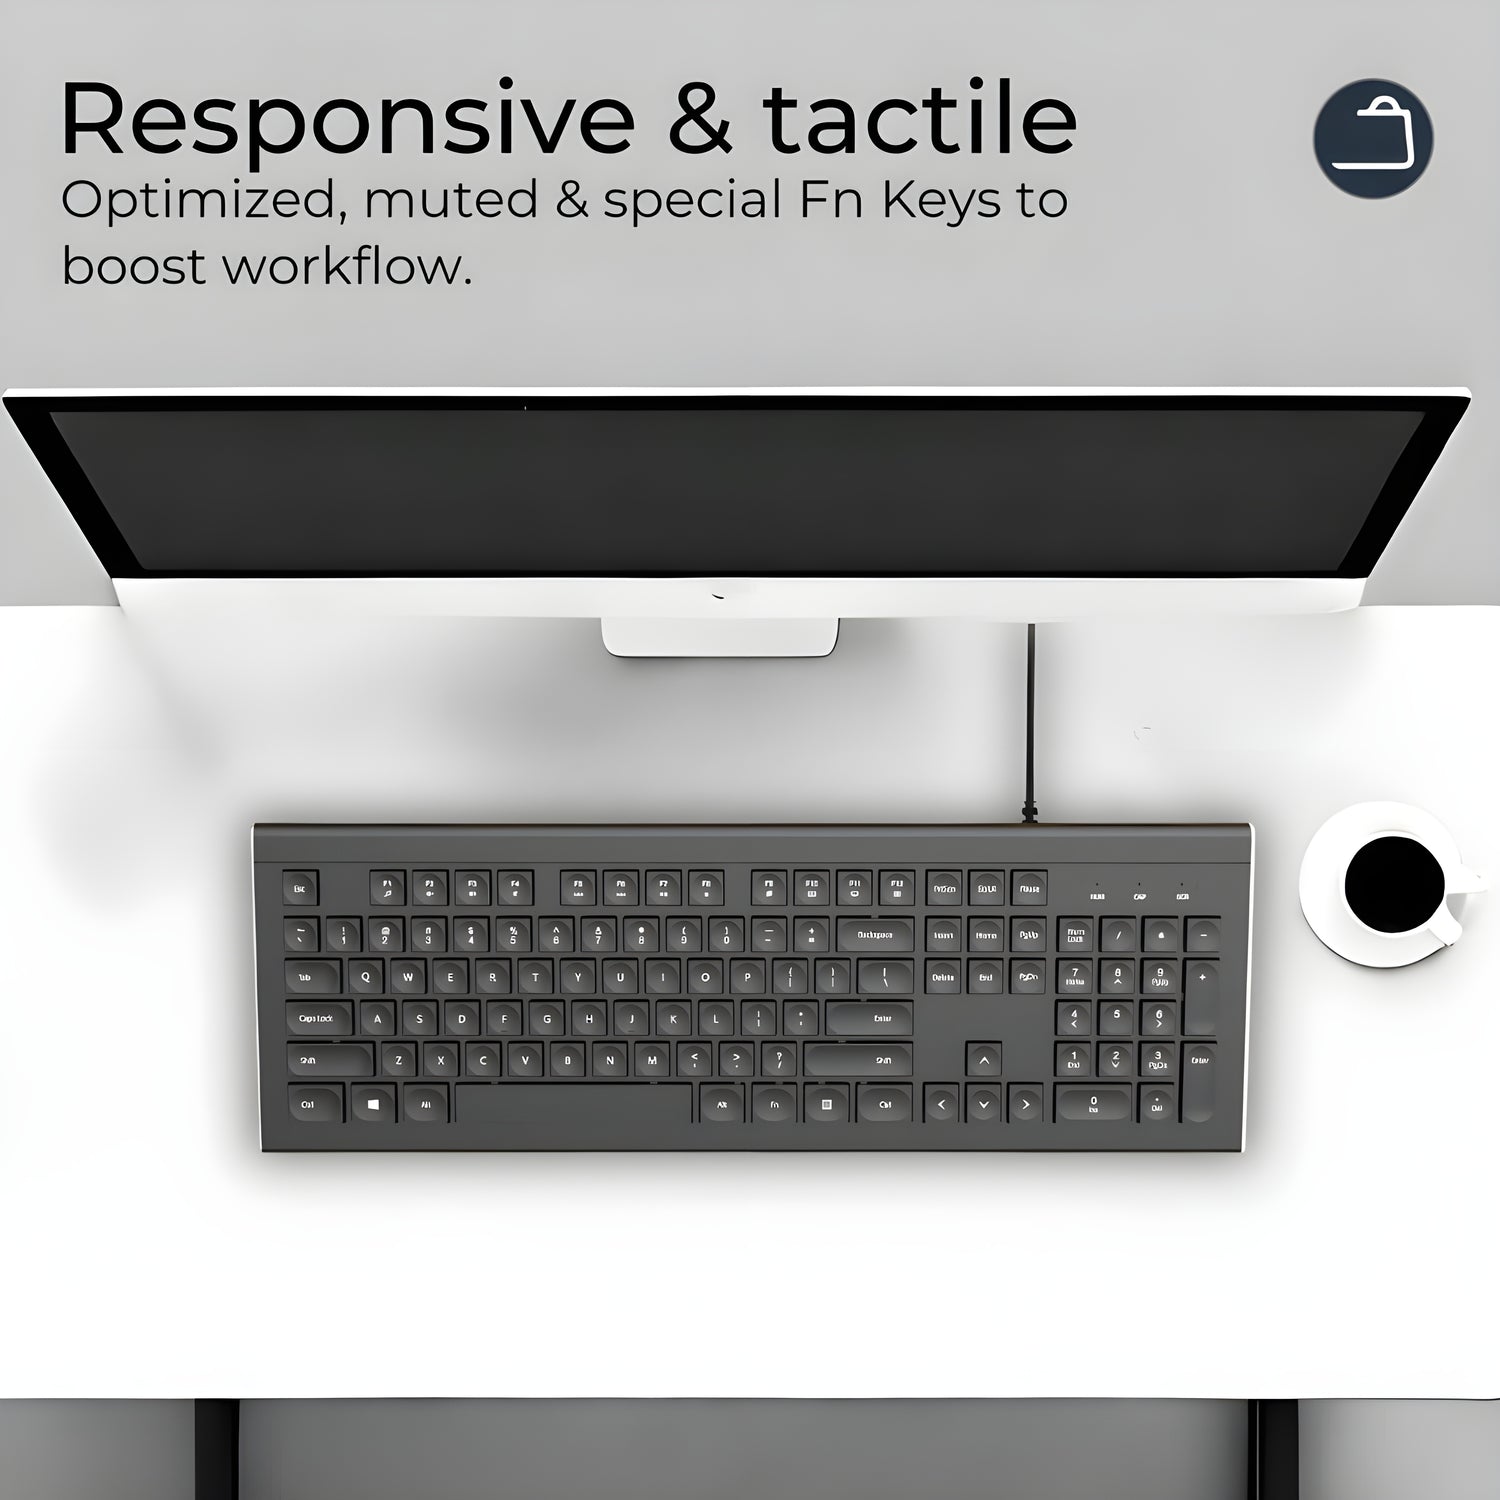 Overhead view of a Clevisco workspace featuring an ergonomic keyboard, streamlined for enhanced workflow, with function keys prominently displayed, set against a modern, minimalist desk setup with a cup of coffee to the side. Infographic : Responsive & tactile, caption optimized,muted,& special Fn keys to boost workflow.